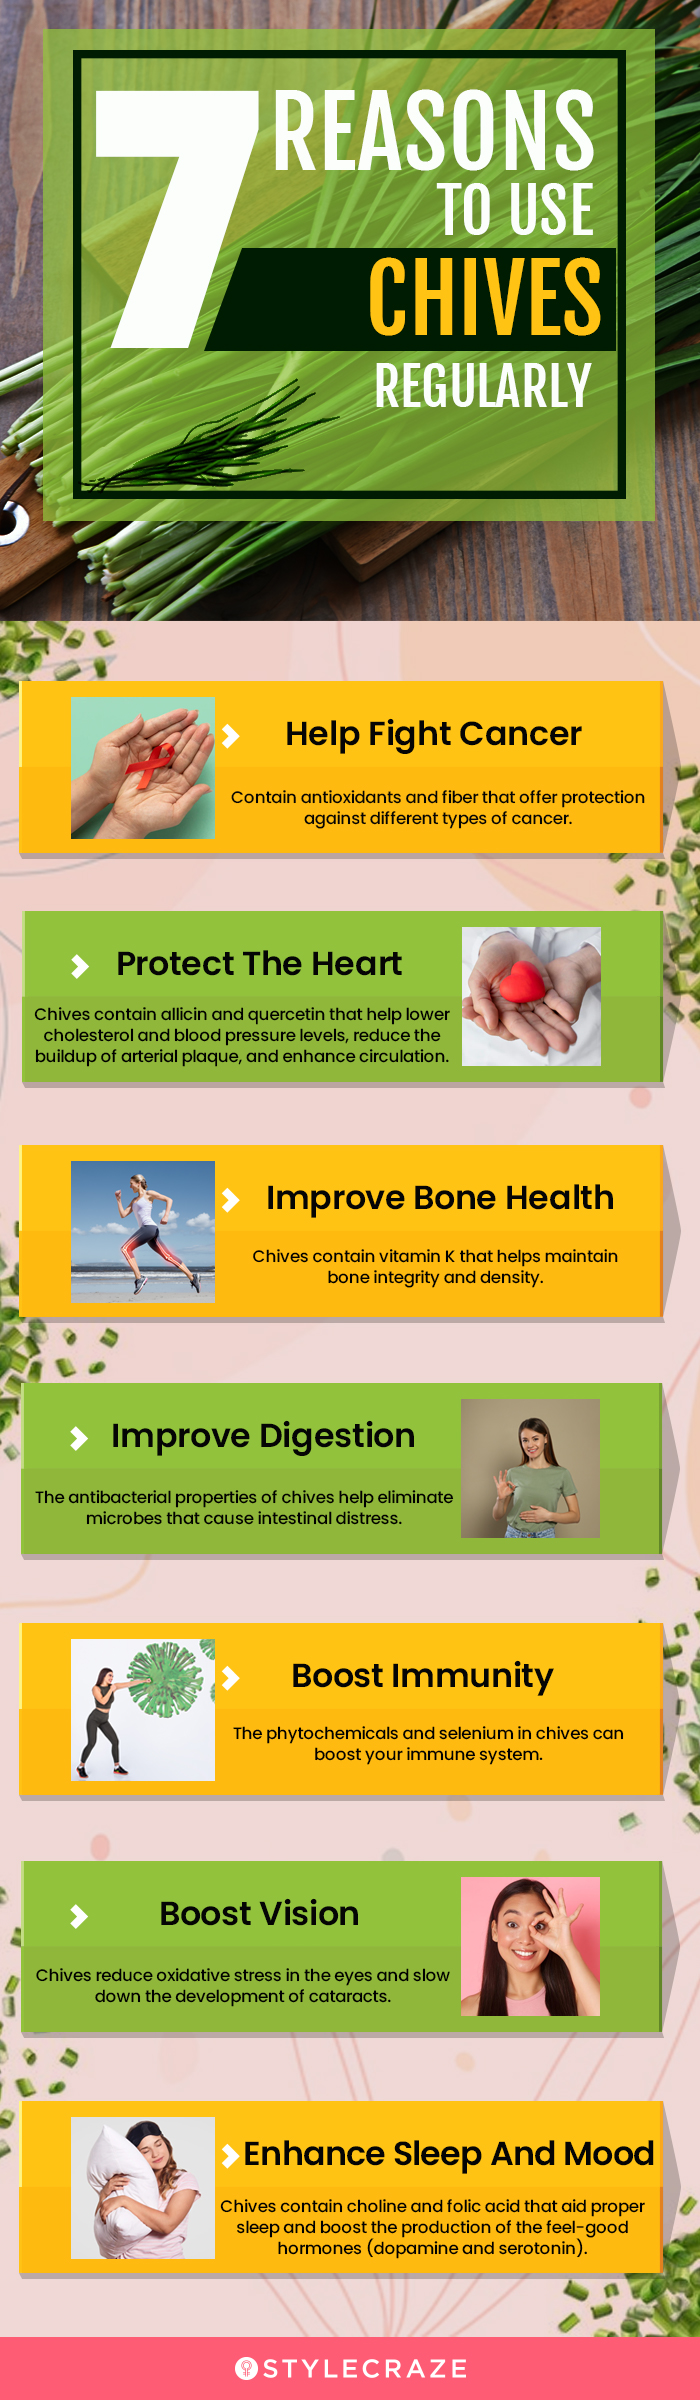 7 reasons to use chives regularly [infographic]